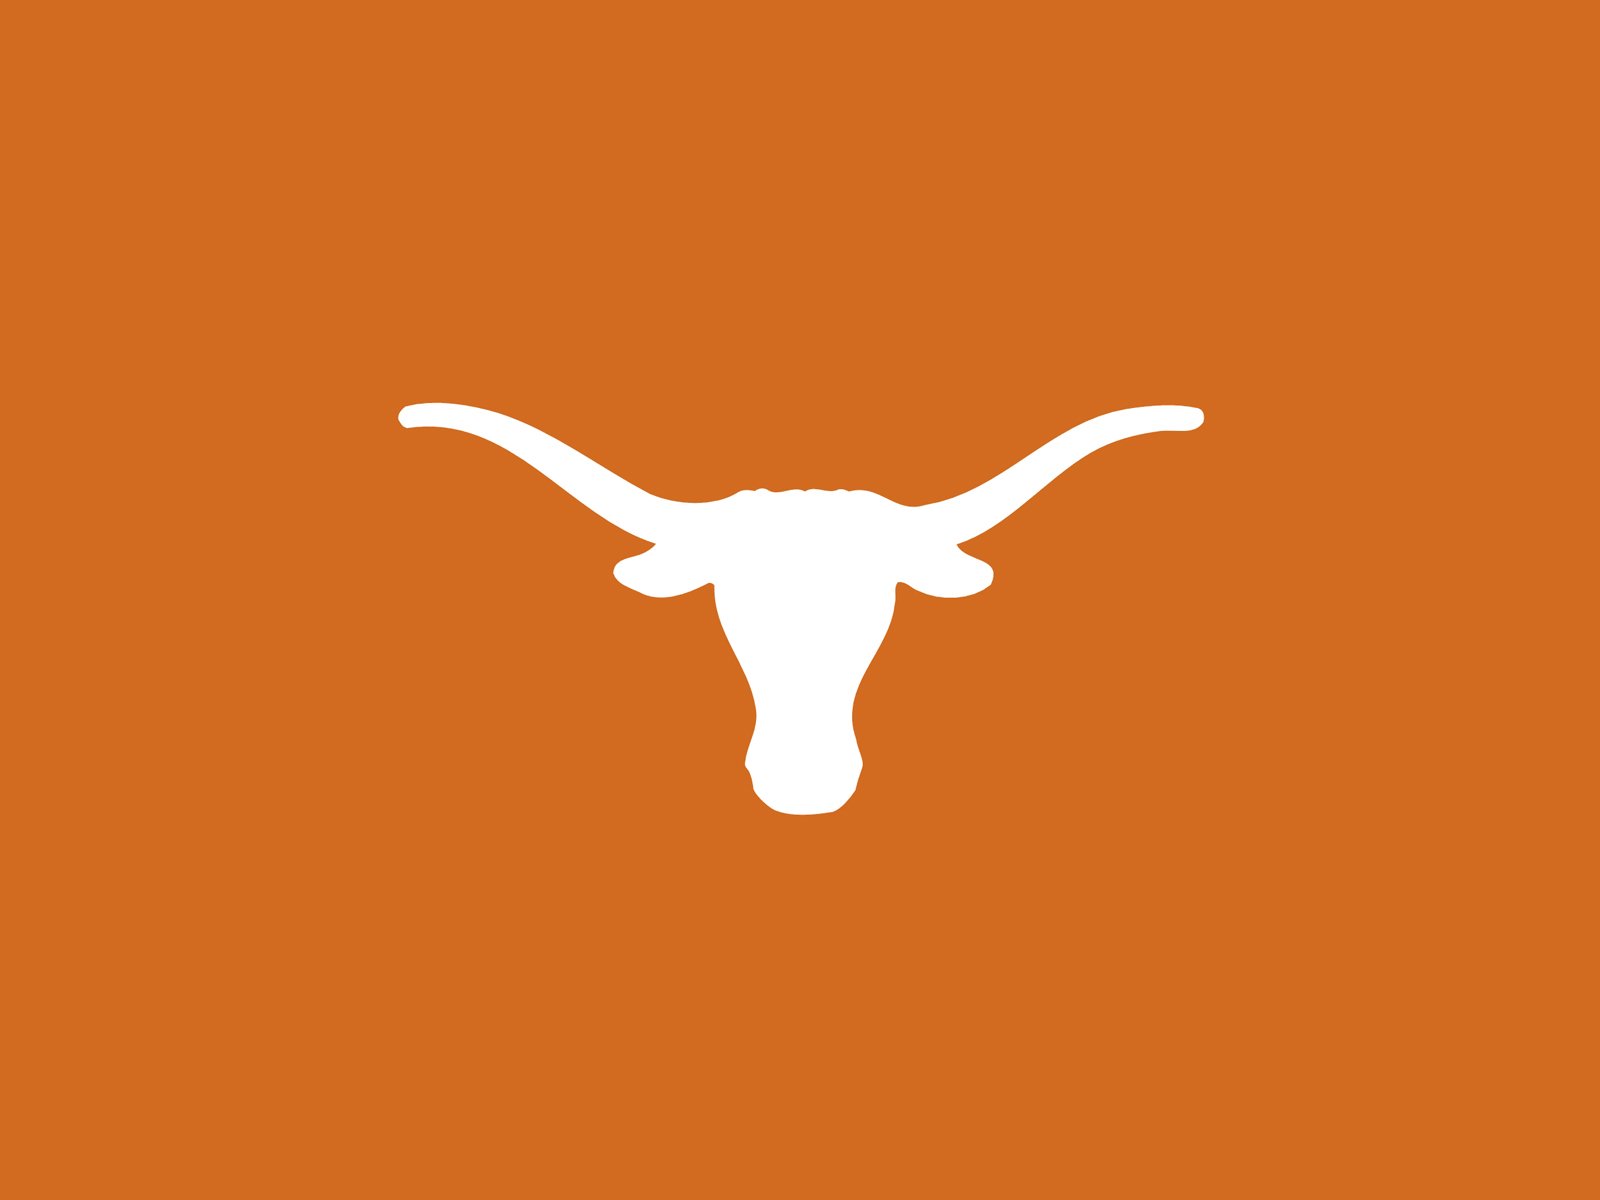 HD wallpapers archived wallpaper 1080p Texas Football Wallpapers